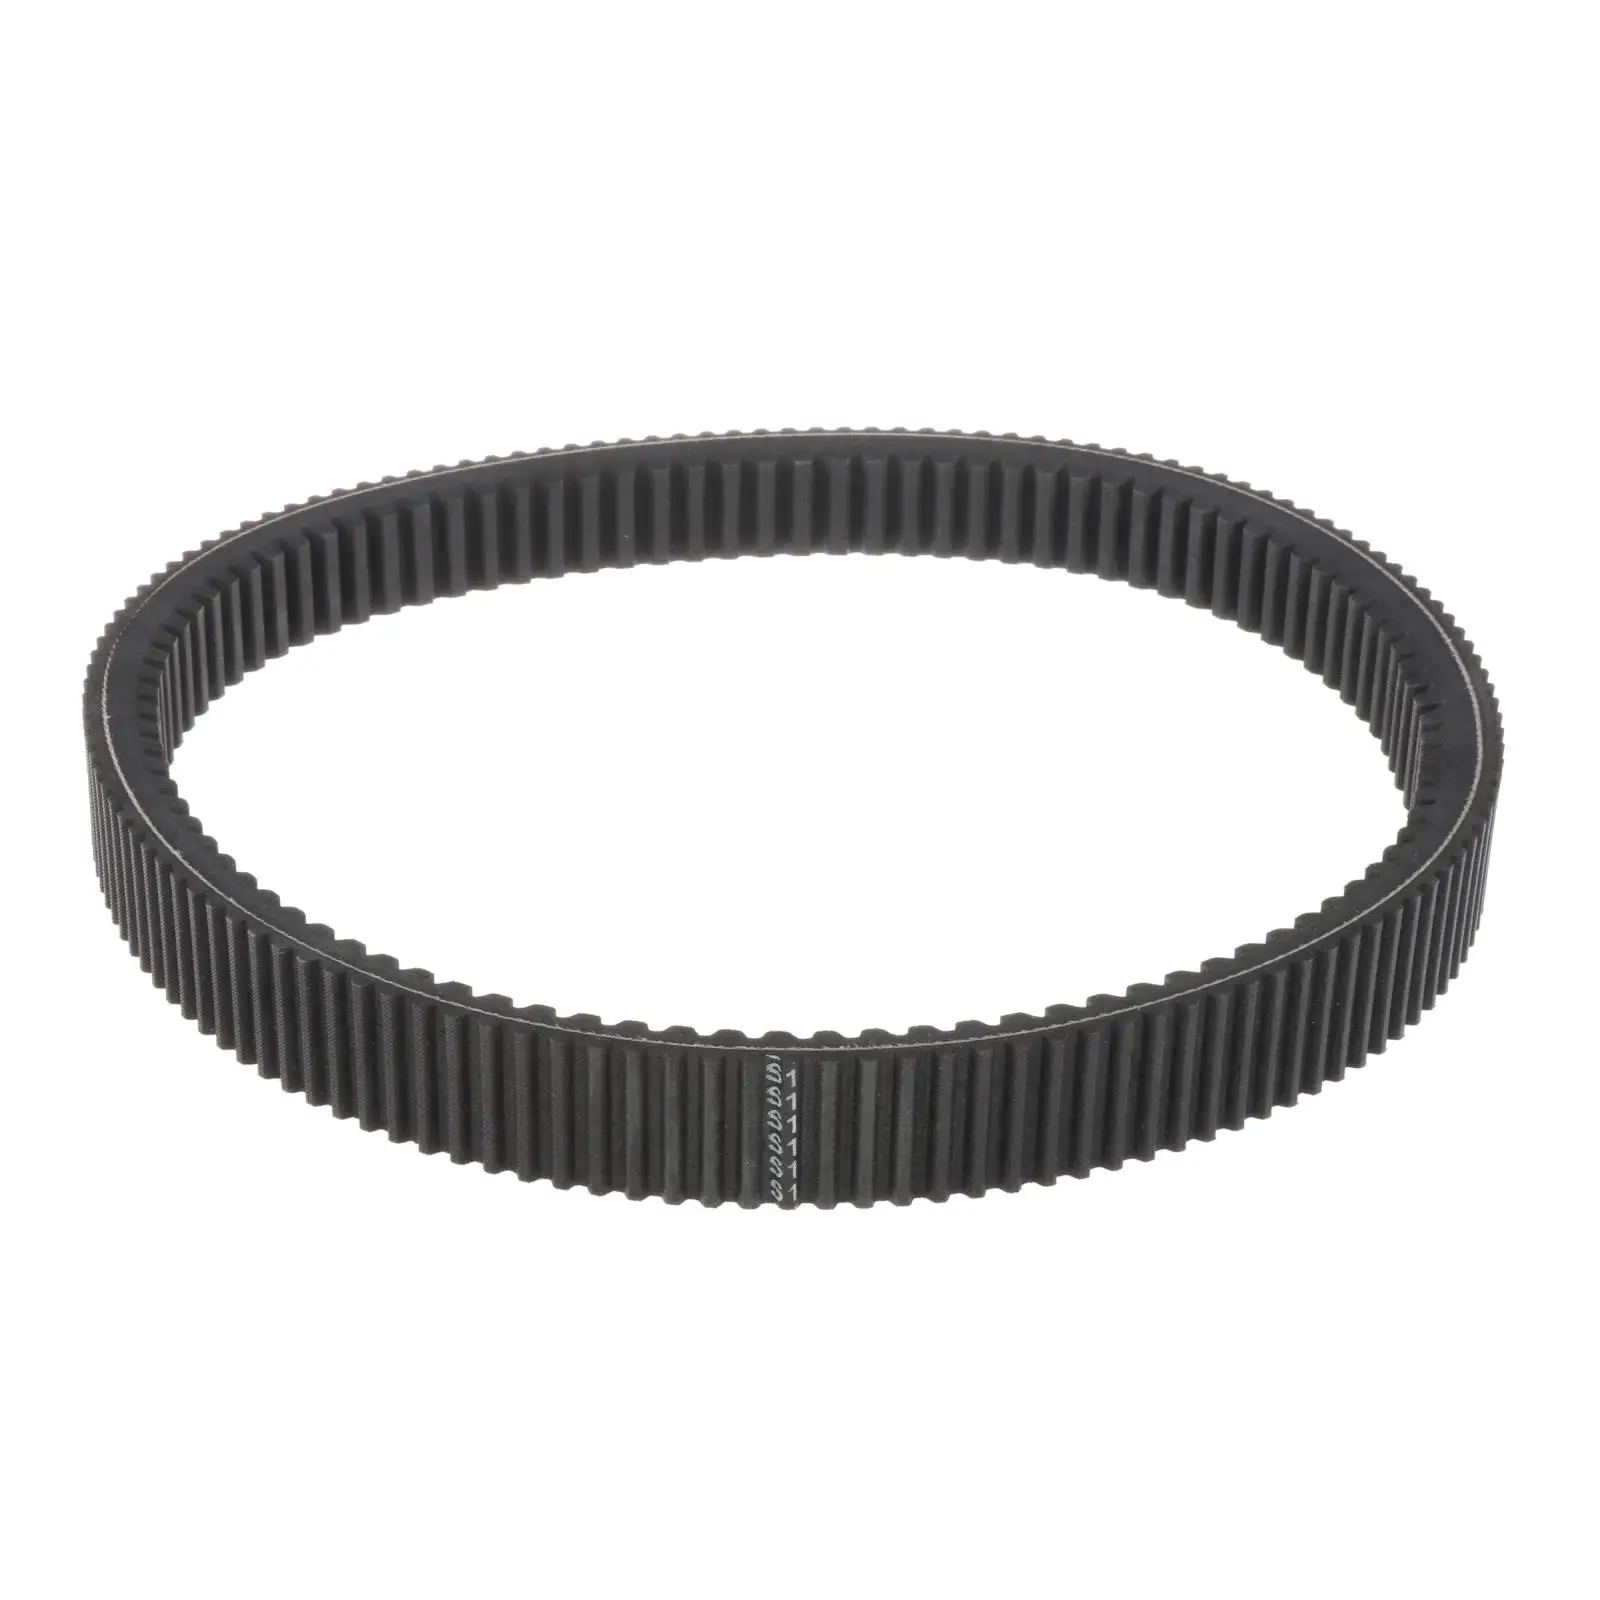 New Snowmobile Performance Drive Belt Double-Sided Replace 417300571 for Ski-Doo 850 E-TEC